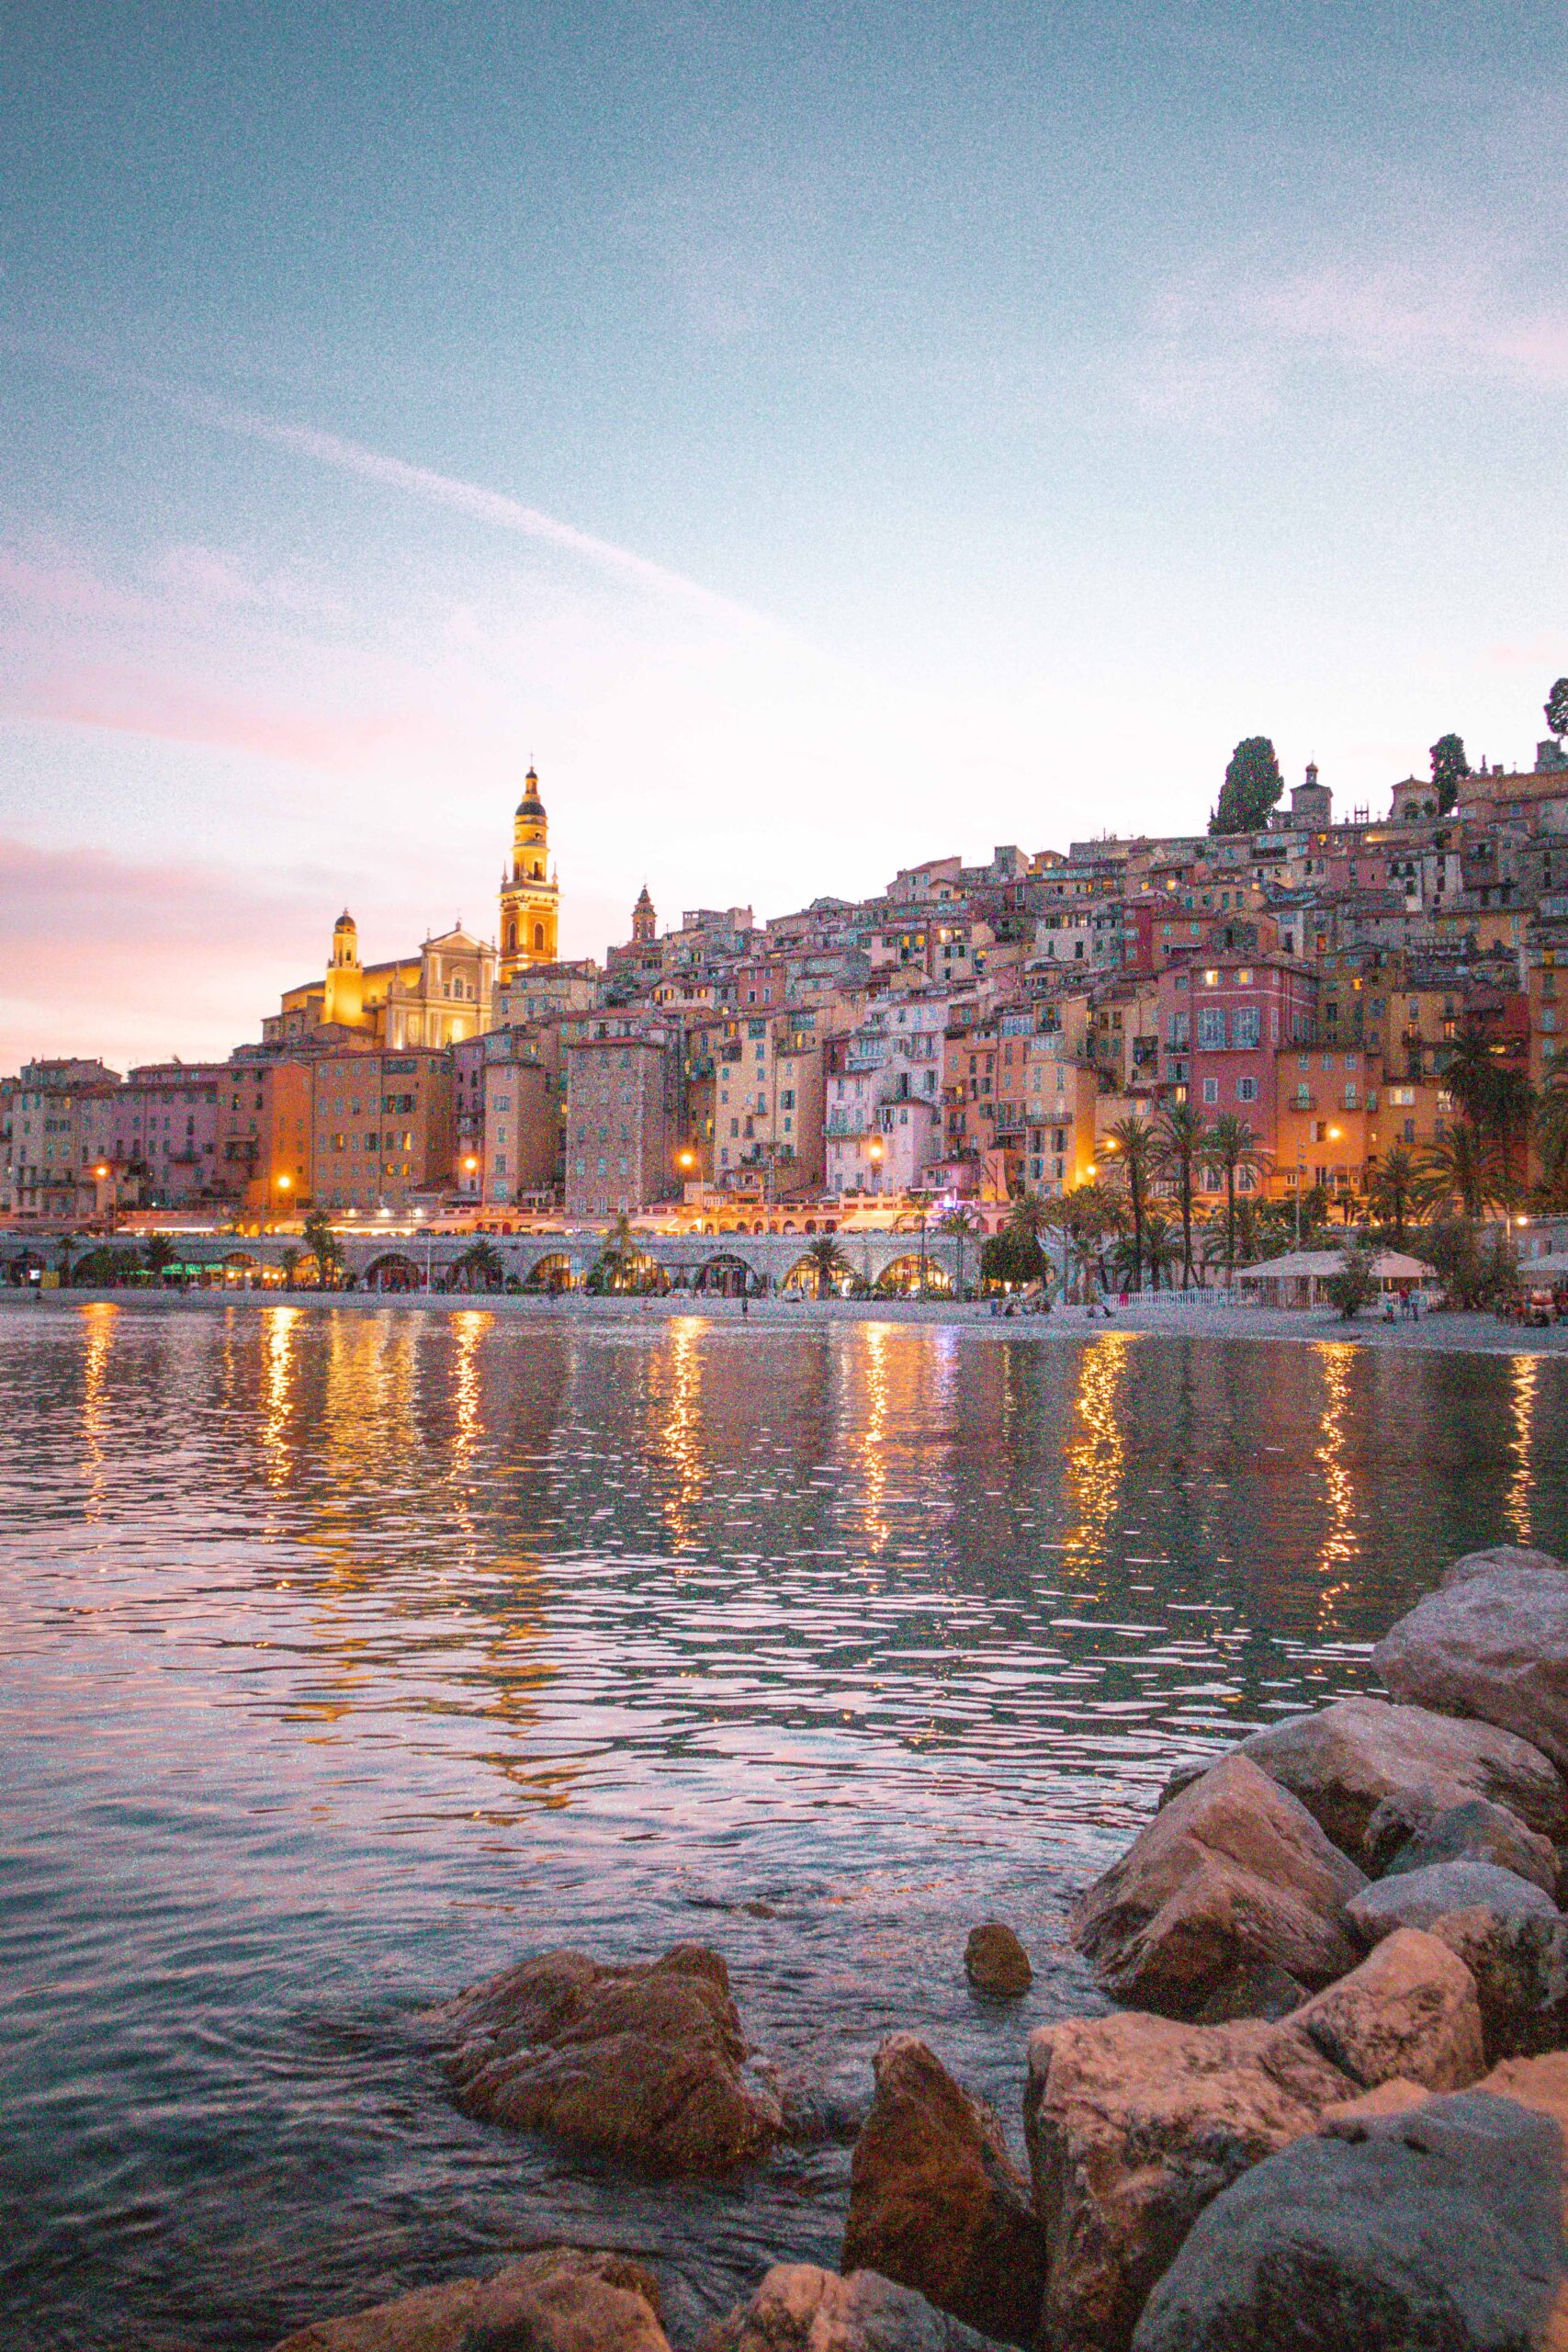 Panoramic view of Menton's waterfront during sunset in Menton, France